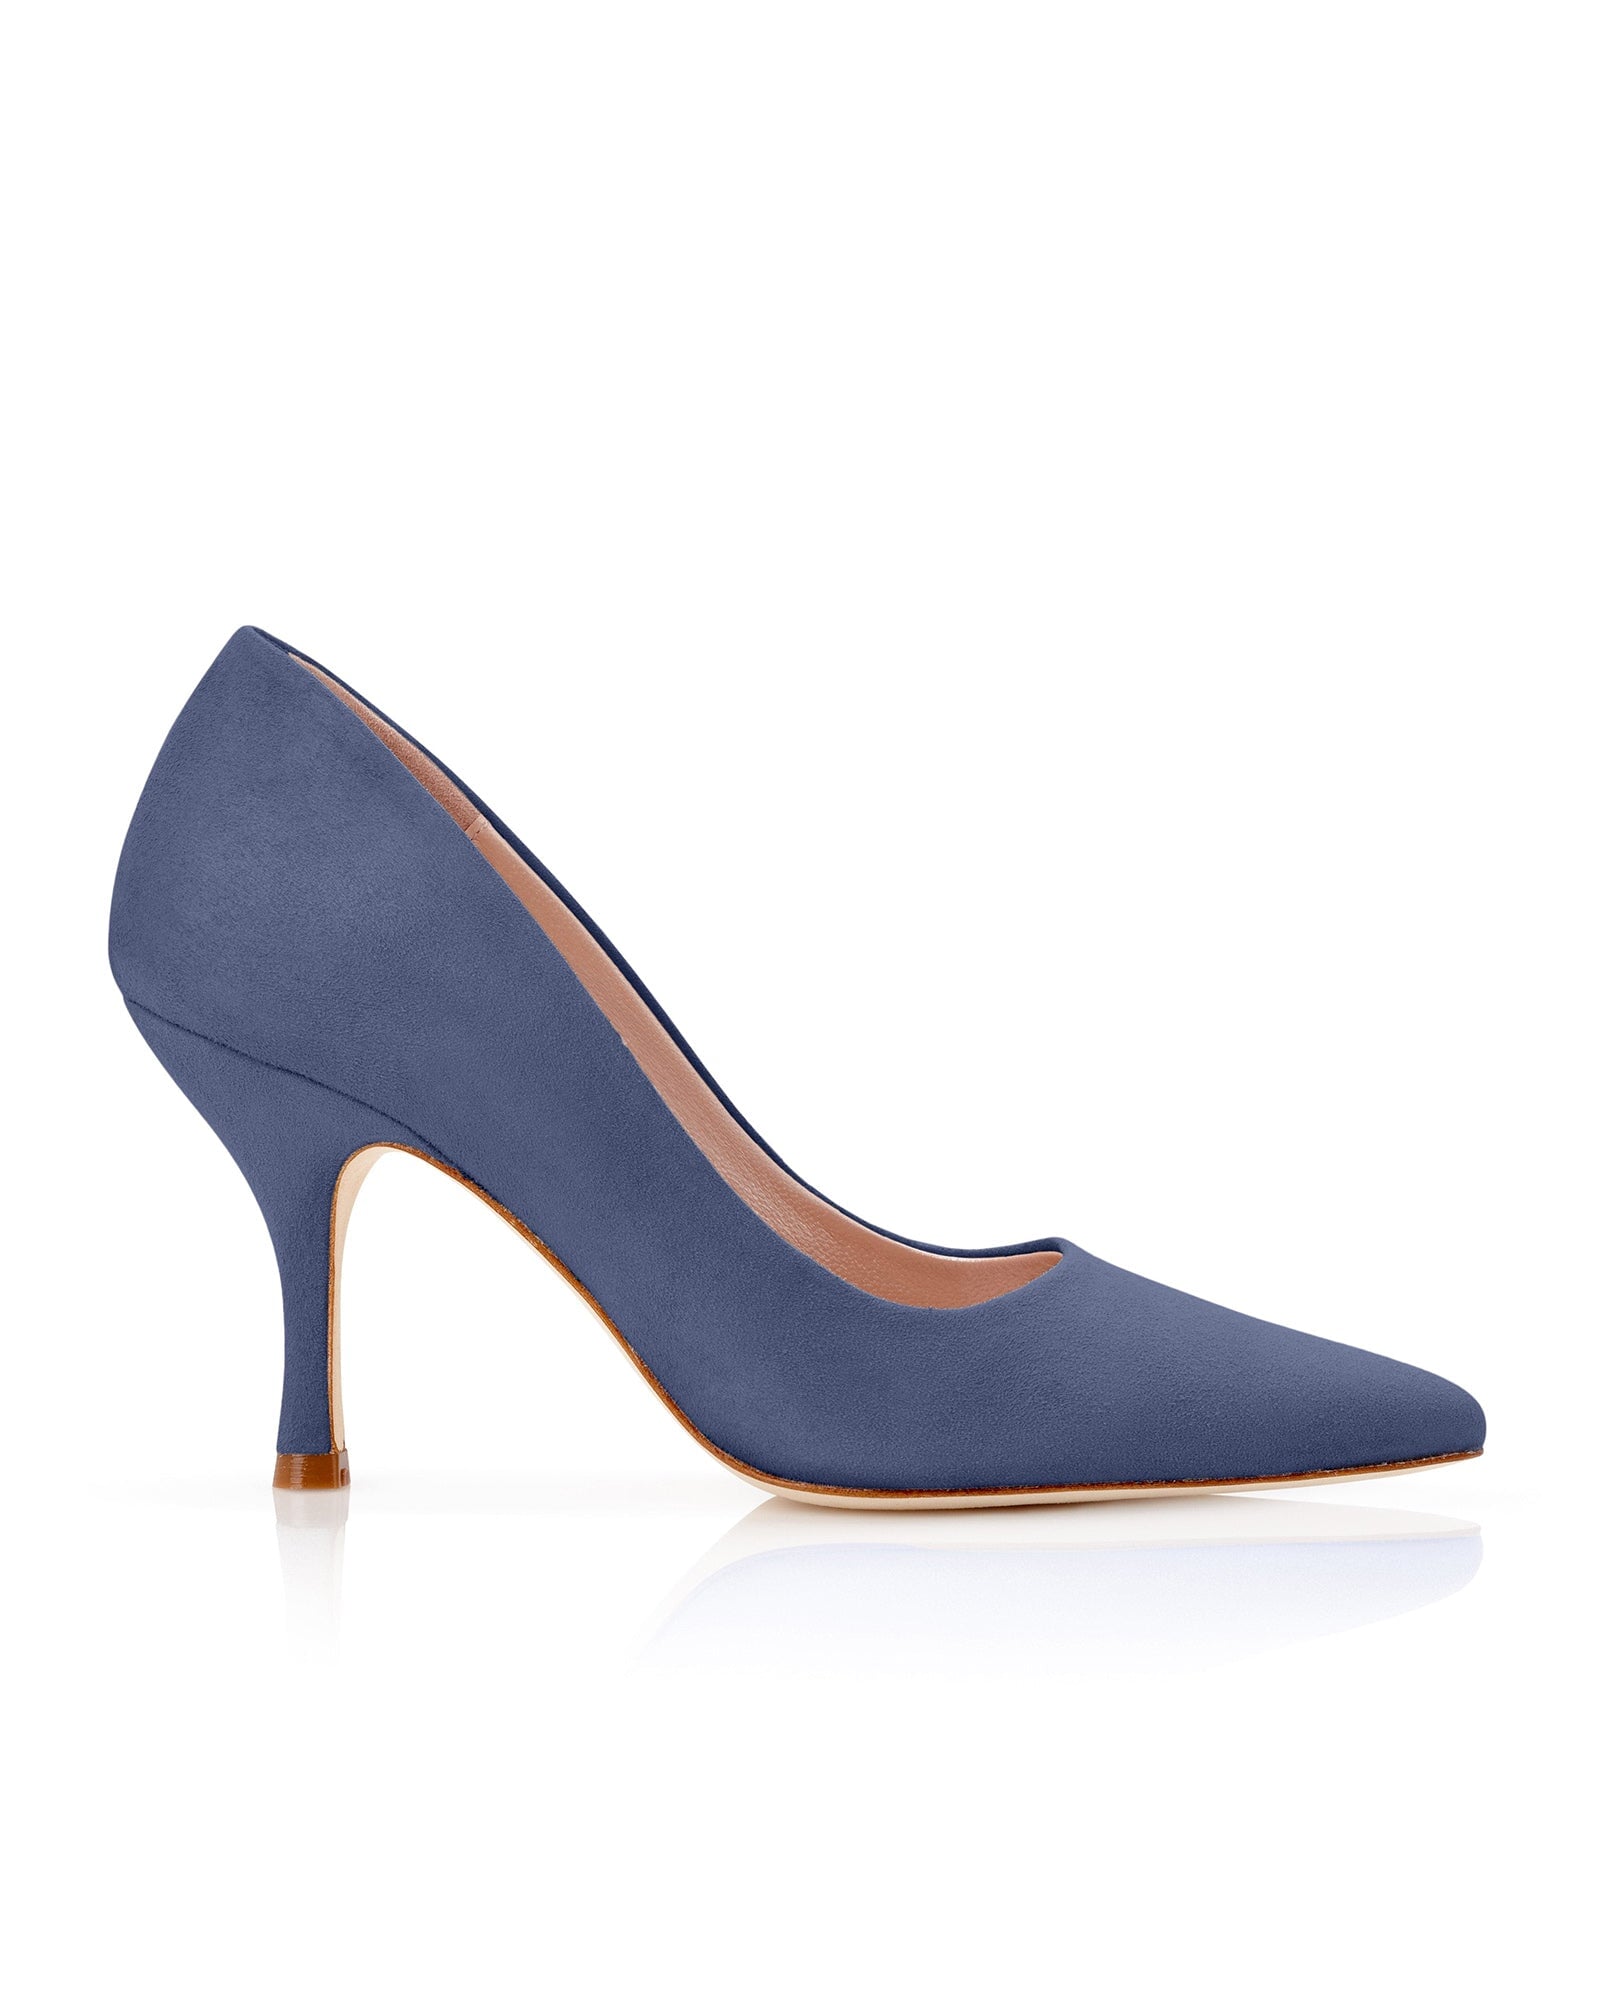 Olivia Riviera Fashion Shoe Blue-Grey Suede Pointed Court  image